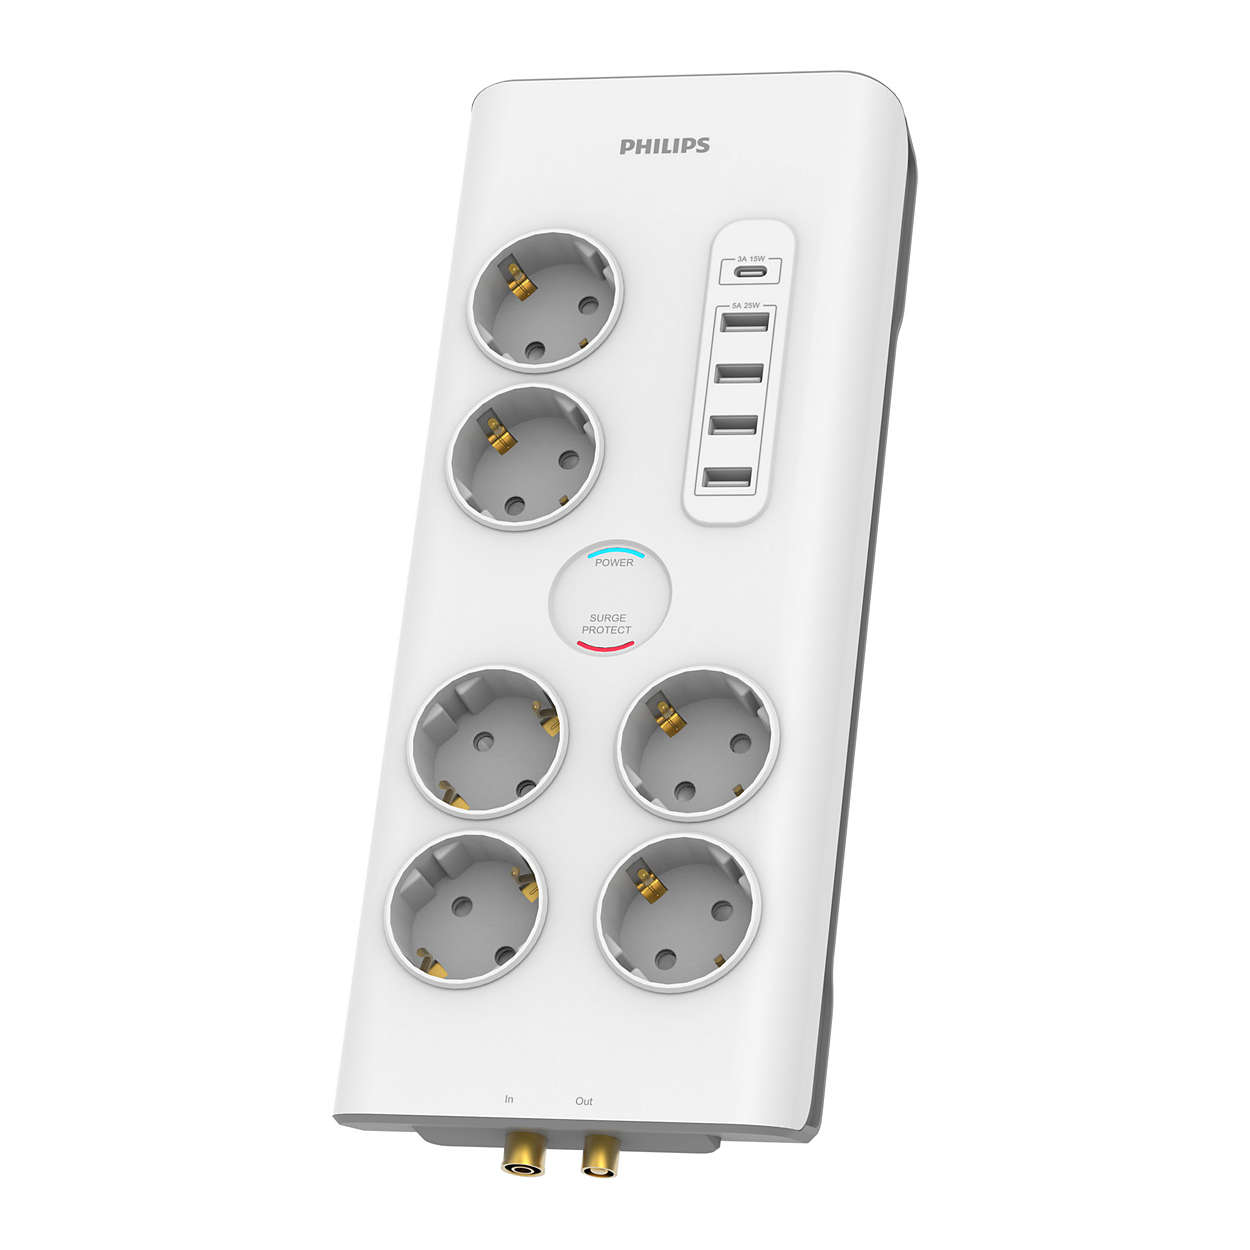 Philips SPN7061WA 6 AC Outlets With USB-A and USB-C Ports Extension Power Strip 3680W - разклонител с 4xUSB-A и 1хUSB-C порта и 6хAC изхода (бял)